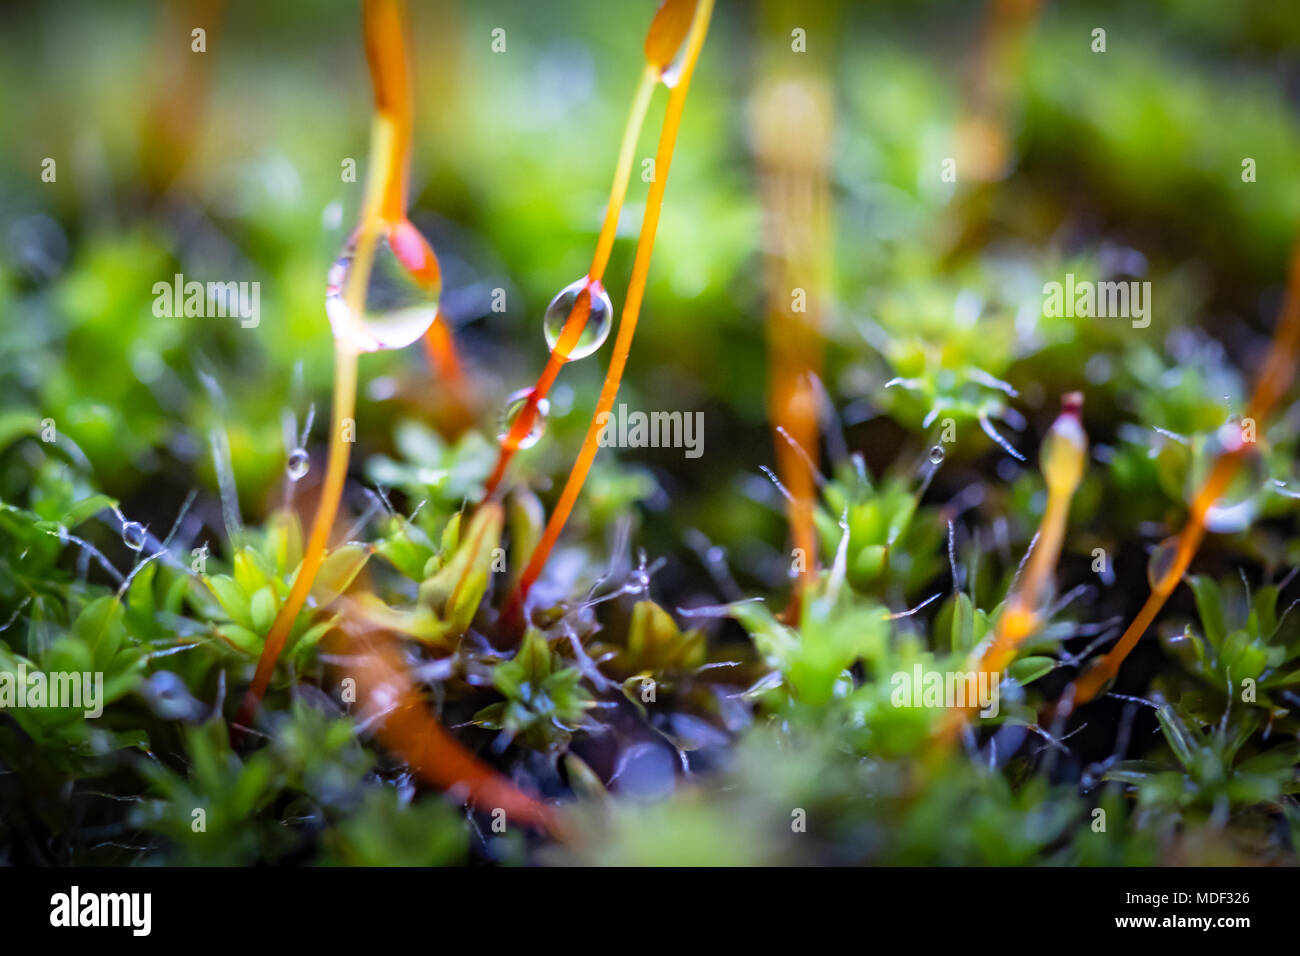 Macro photography of springtime moss and water droplets seen growing in an outdoor location. This shallow focus is aimed at a droplet on the right. Stock Photo